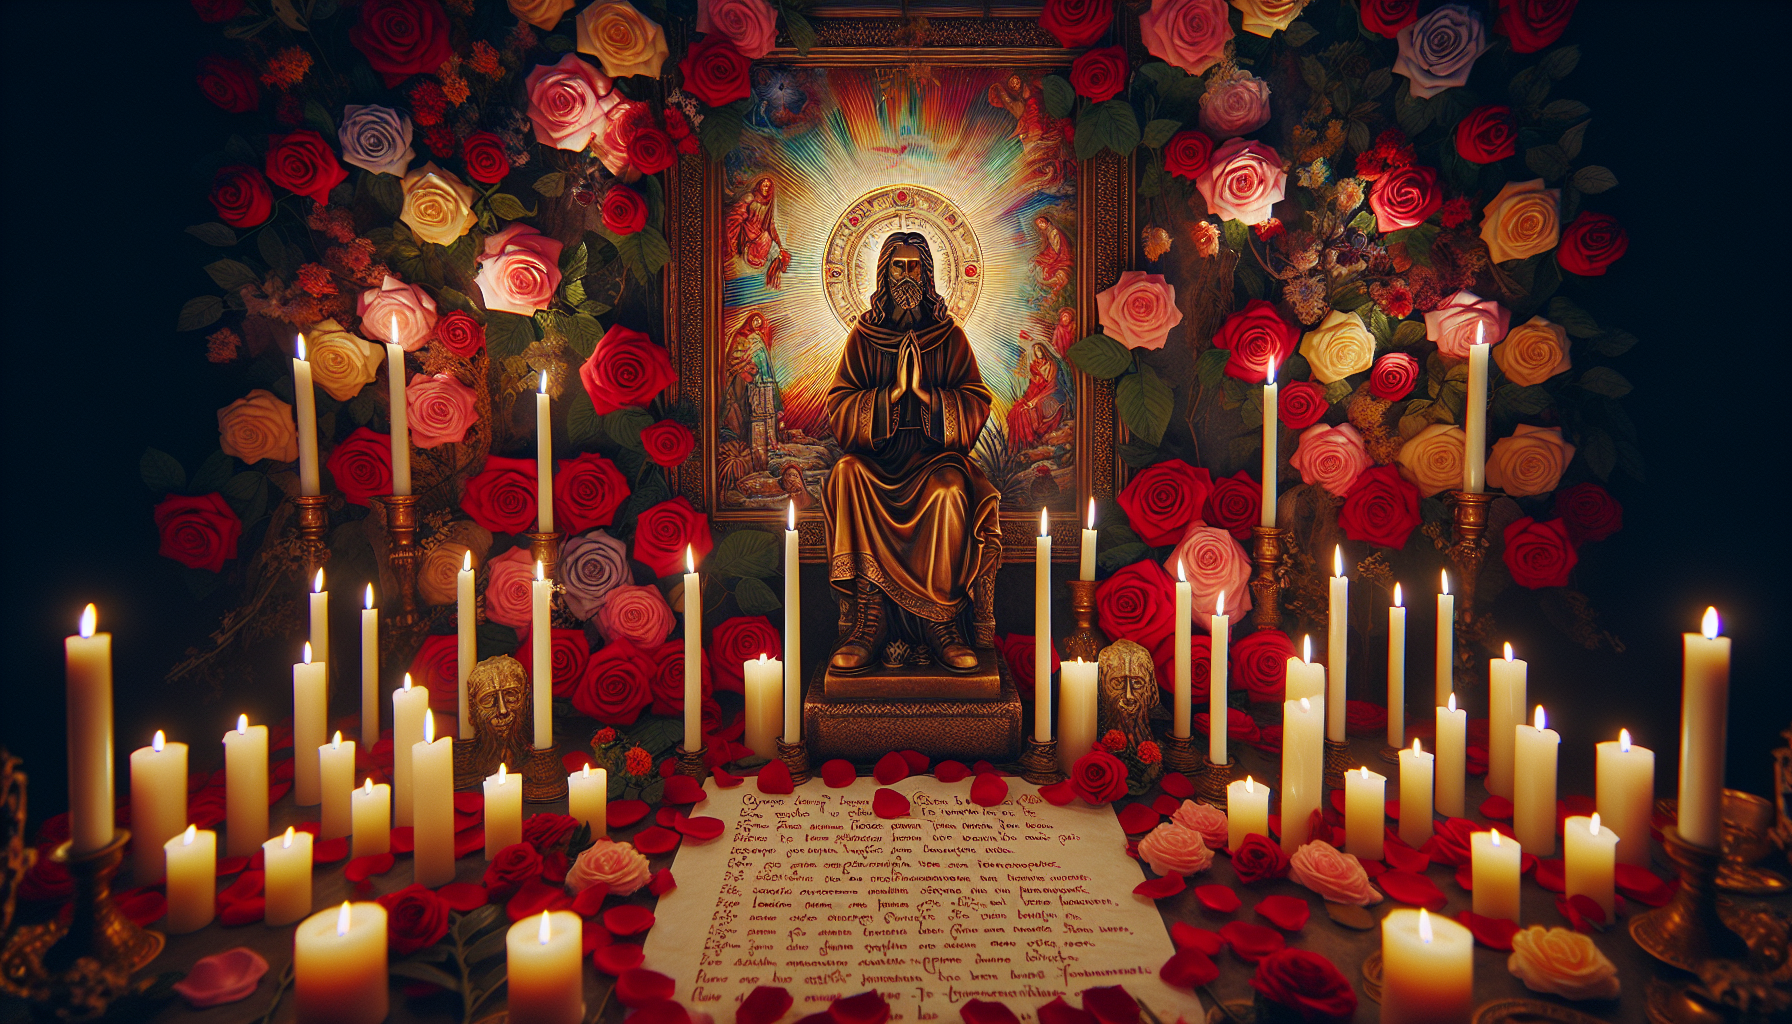 An enchanting candlelit altar with a venerable statue of Saint Jude Thaddeus surrounded by vibrant red roses and lit candles, with a handwritten prayer for finding true love delicately placed in front